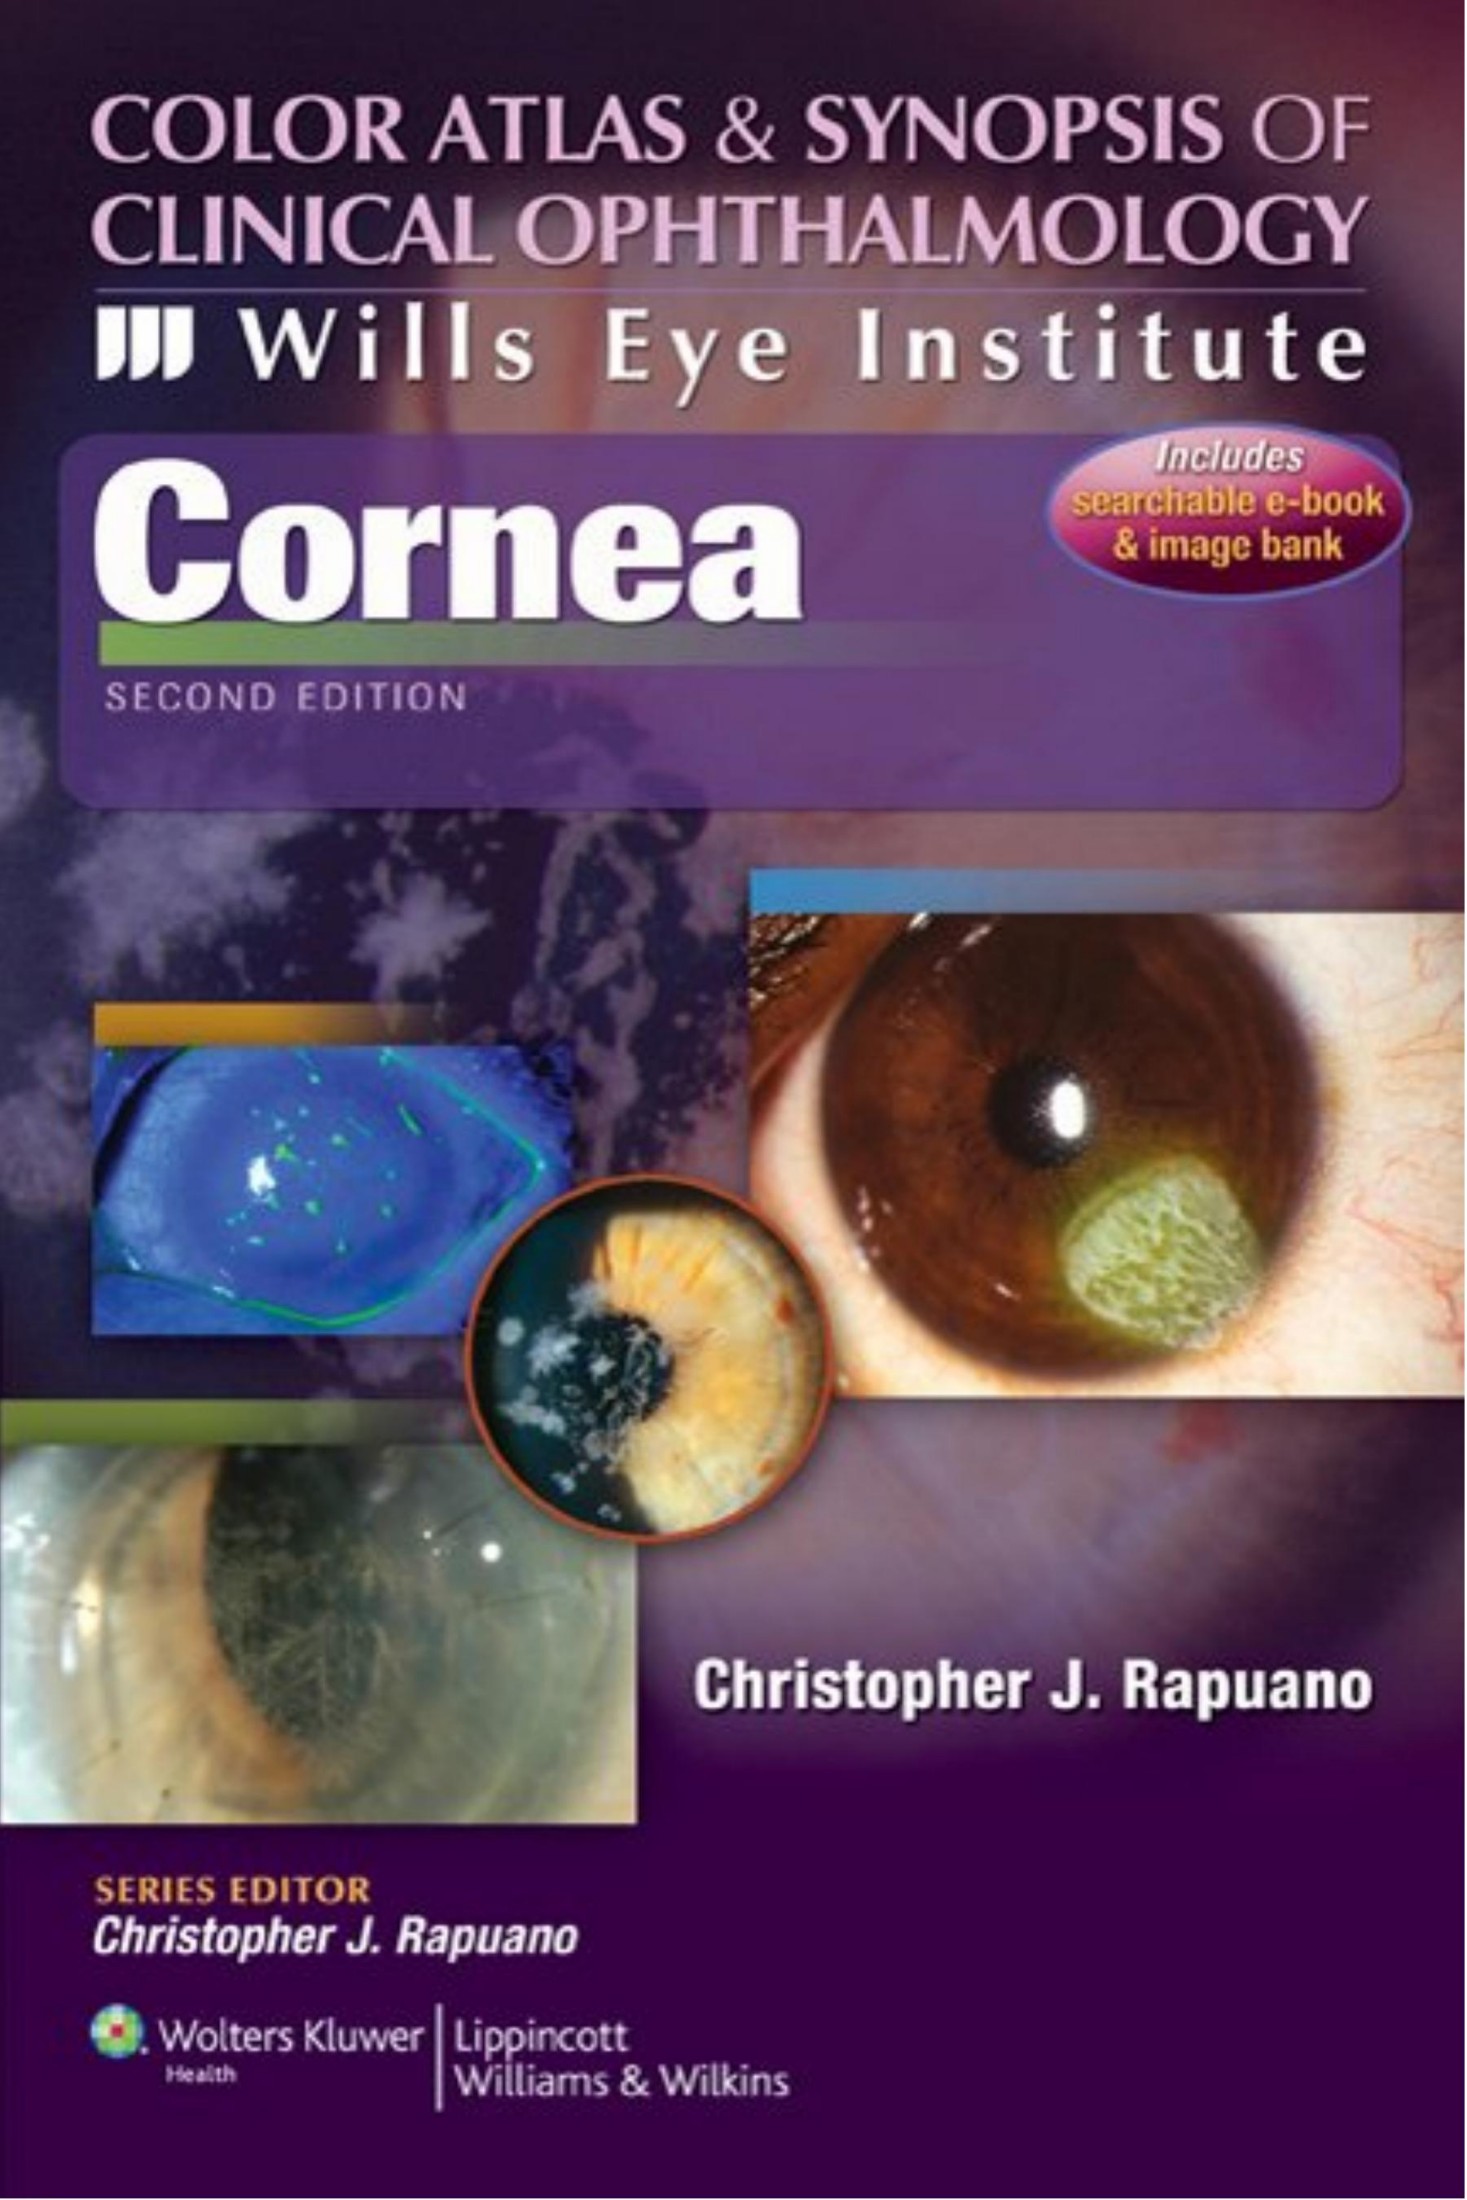 Color Atlas & Synopsis of Clinical Ophthalmology - Wills Eye Institute Cornea-